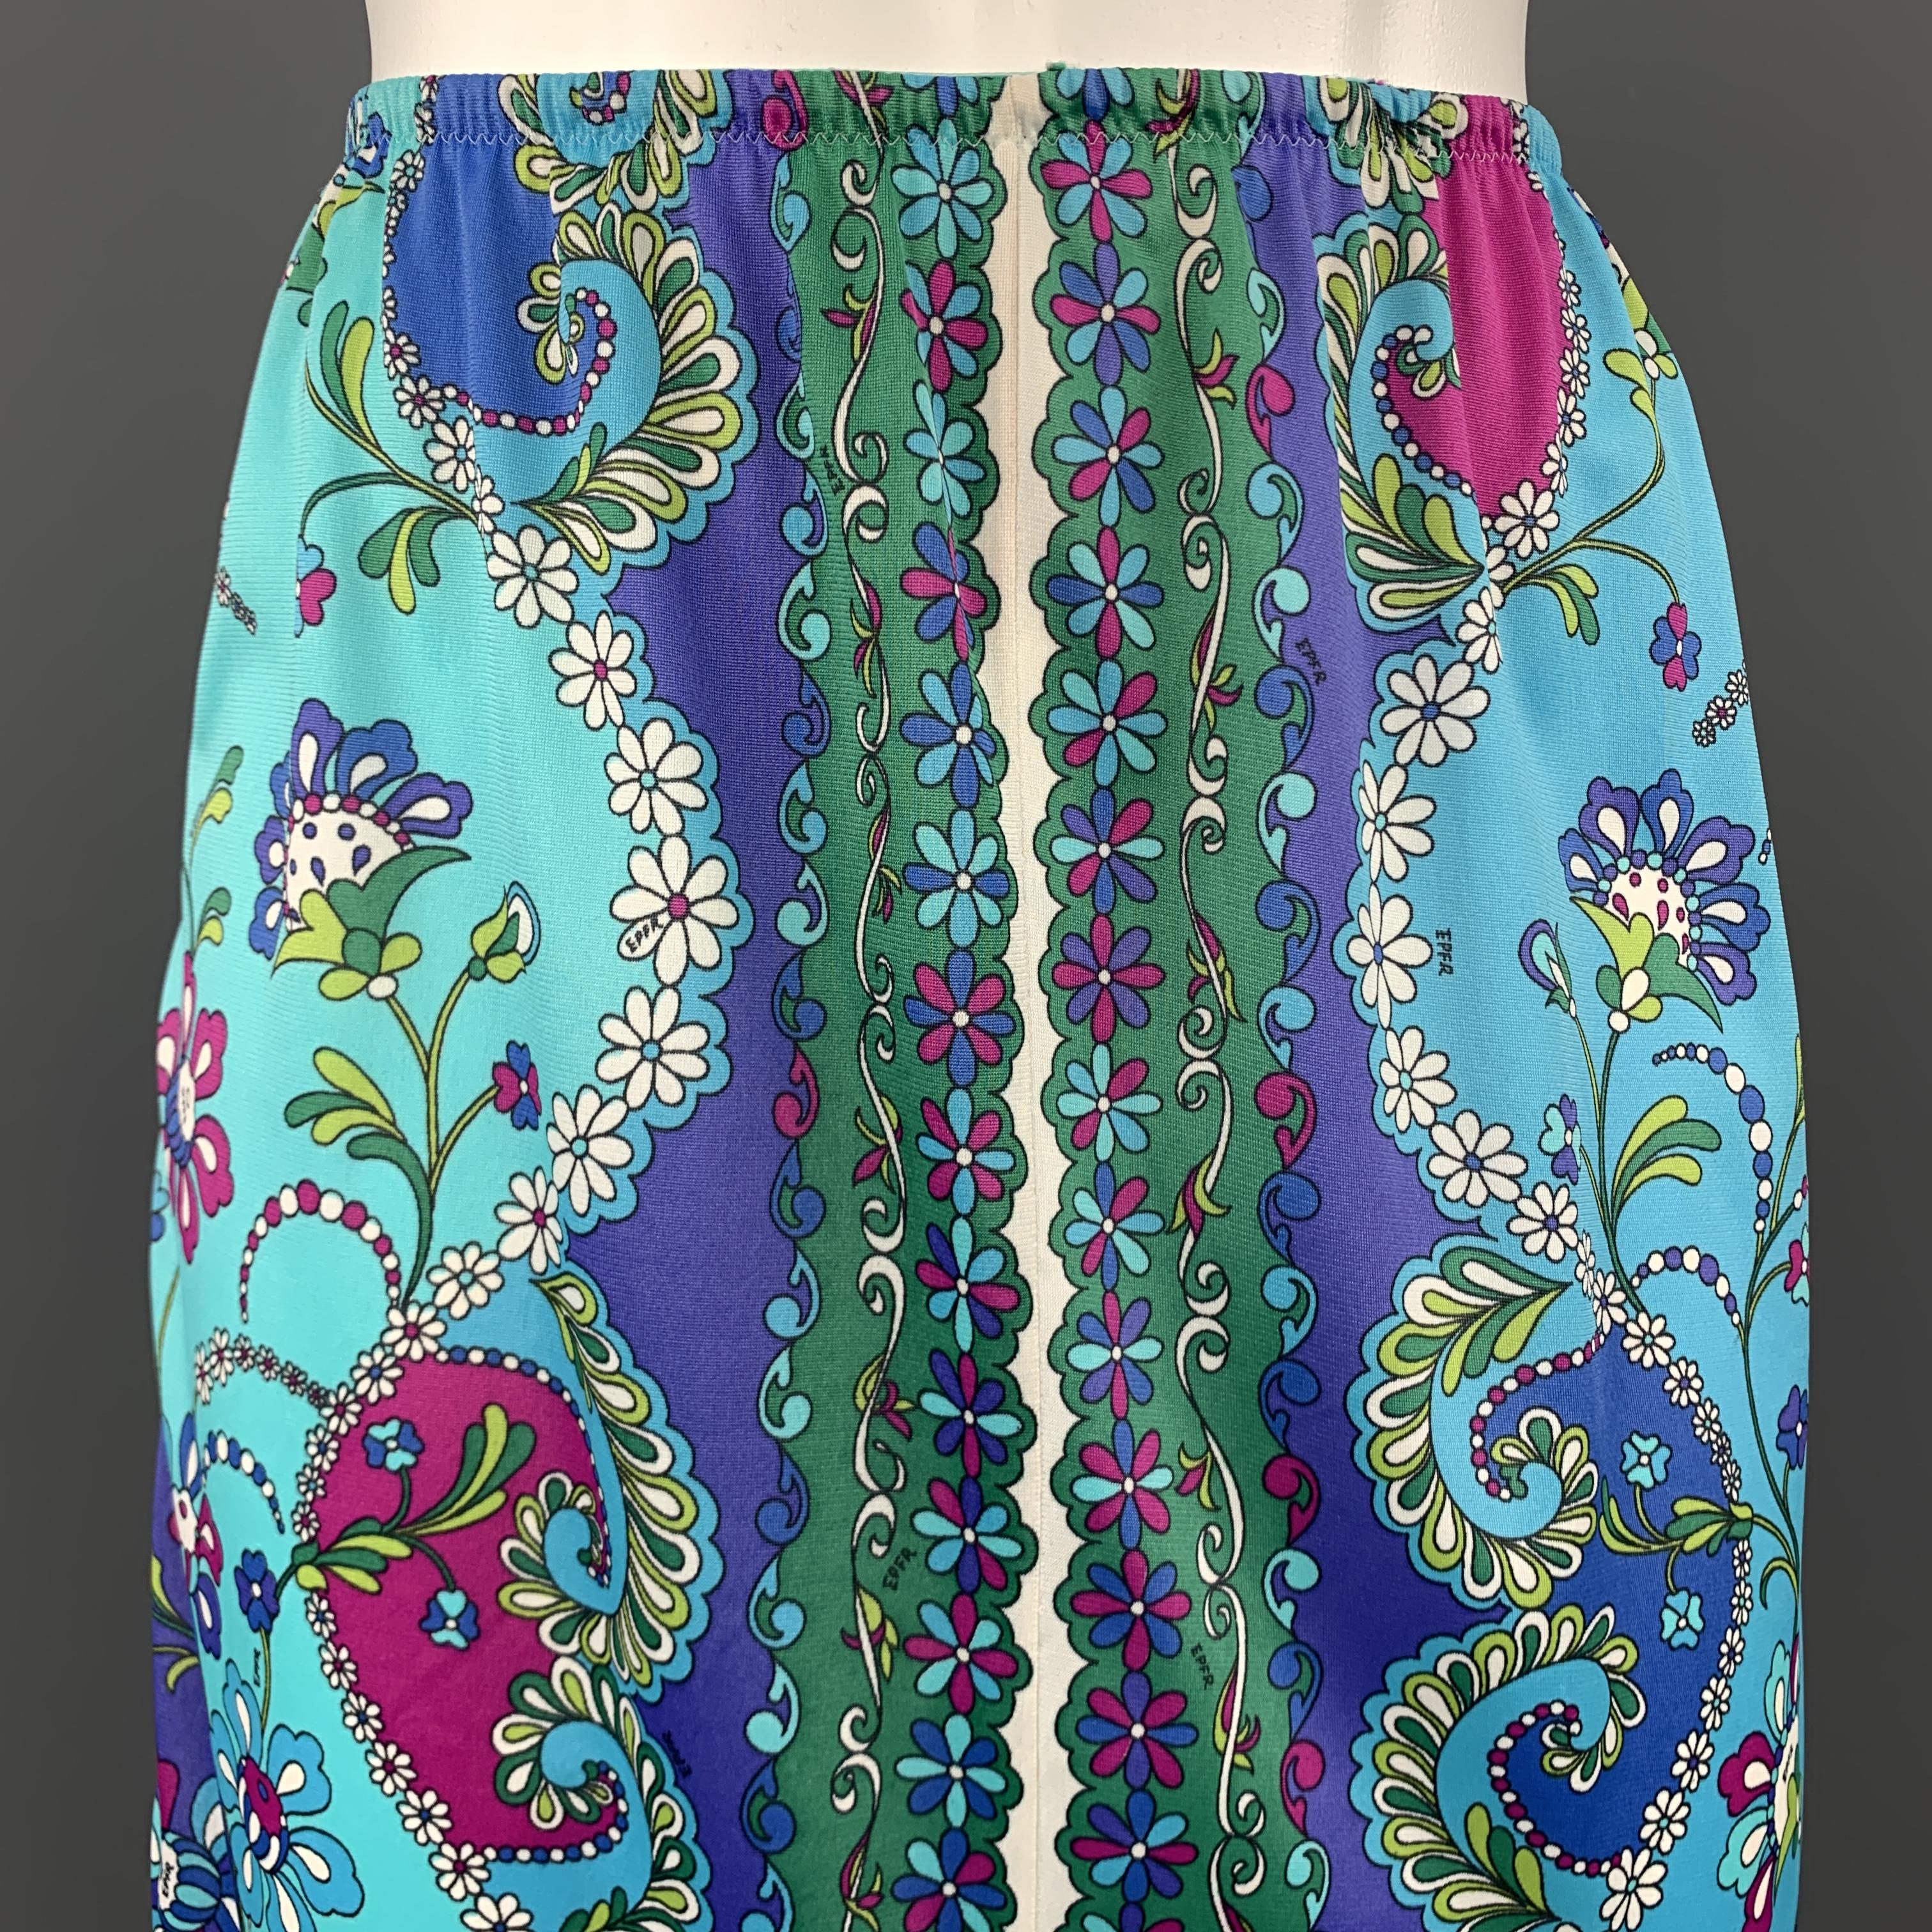 Vintage EMILIO PUCCI for FORMFIT ROGERS slip skirt comes in blue jersey with an all over floral print. Made in USA.

Very Good Pre-Owned Condition.
Marked: (no size)

Measurements:

Waist: 23 in.
Hip: 37 in.
Length: 19 in.